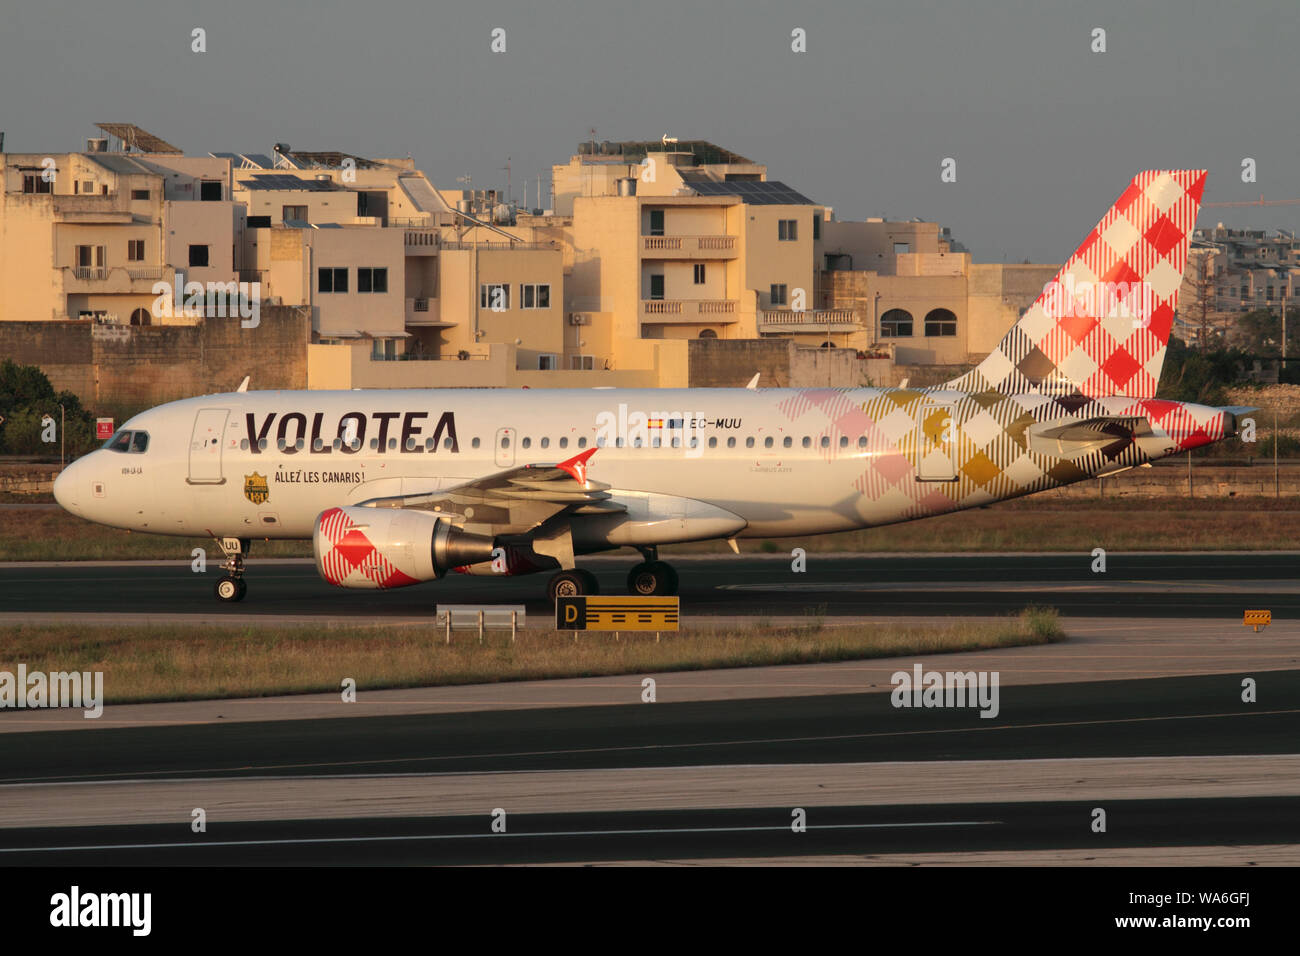 Airbus A319 commercial passenger jet plane belonging to Spanish low cost airline Volotea taxiing on arrival in Malta Stock Photo